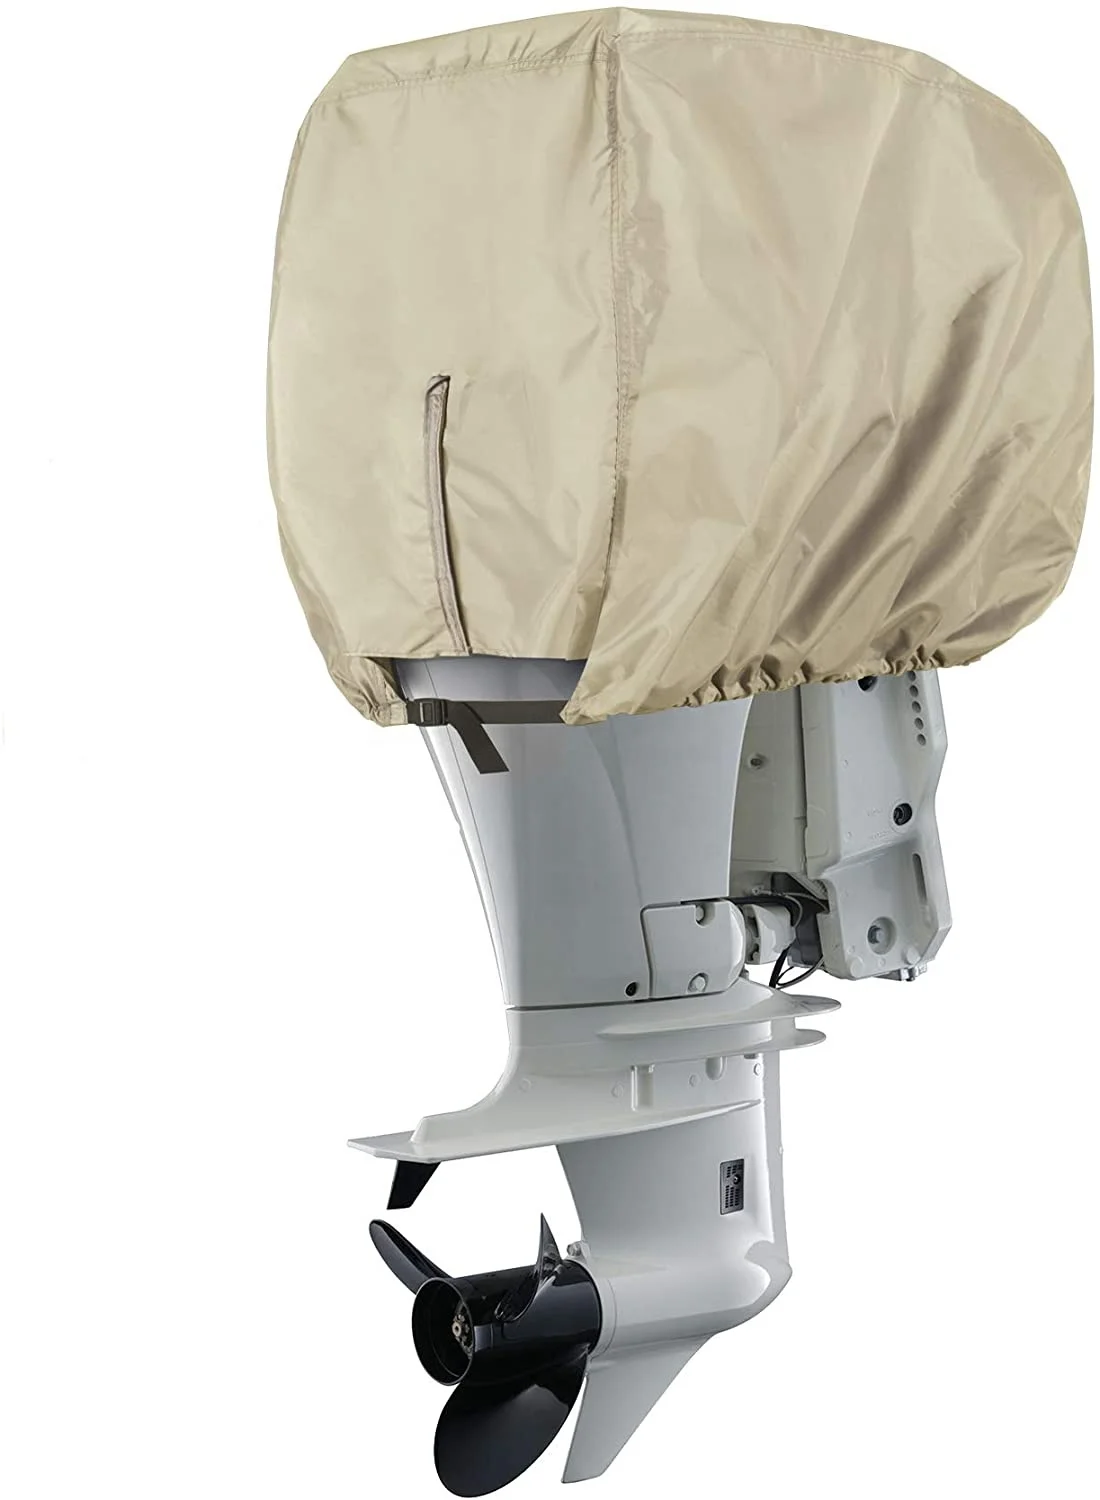 Boat seat cover outboard motor cover engine cover with customized sizes